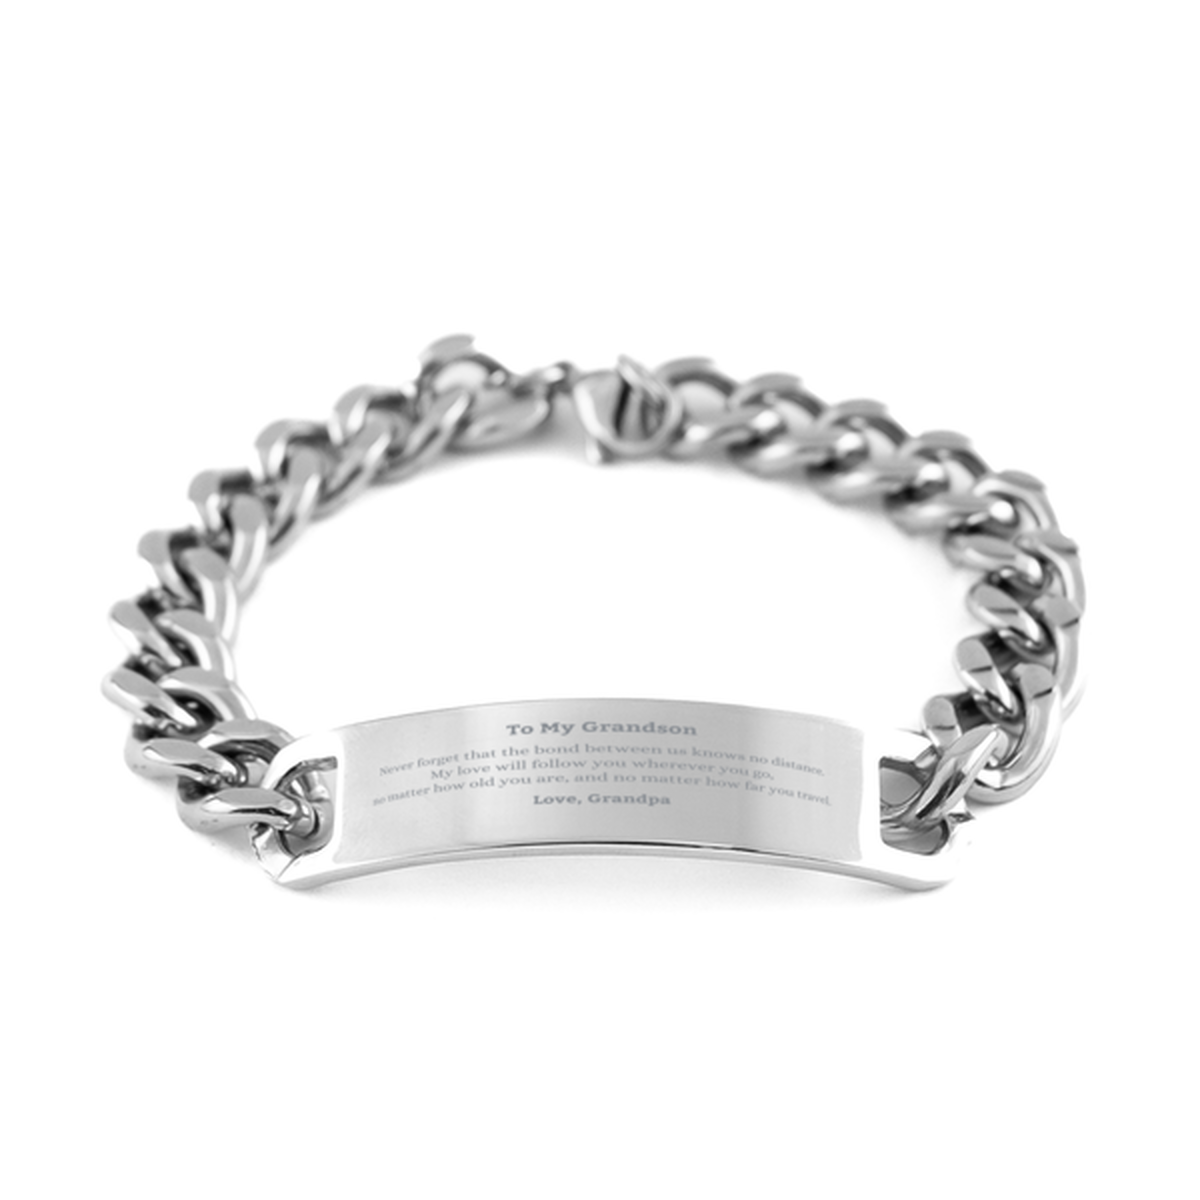 Grandson Birthday Gifts from Grandpa, Adjustable Cuban Chain Stainless Steel Bracelet for Grandson Christmas Graduation Unique Gifts Grandson Never forget that the bond between us knows no distance. Love, Grandpa